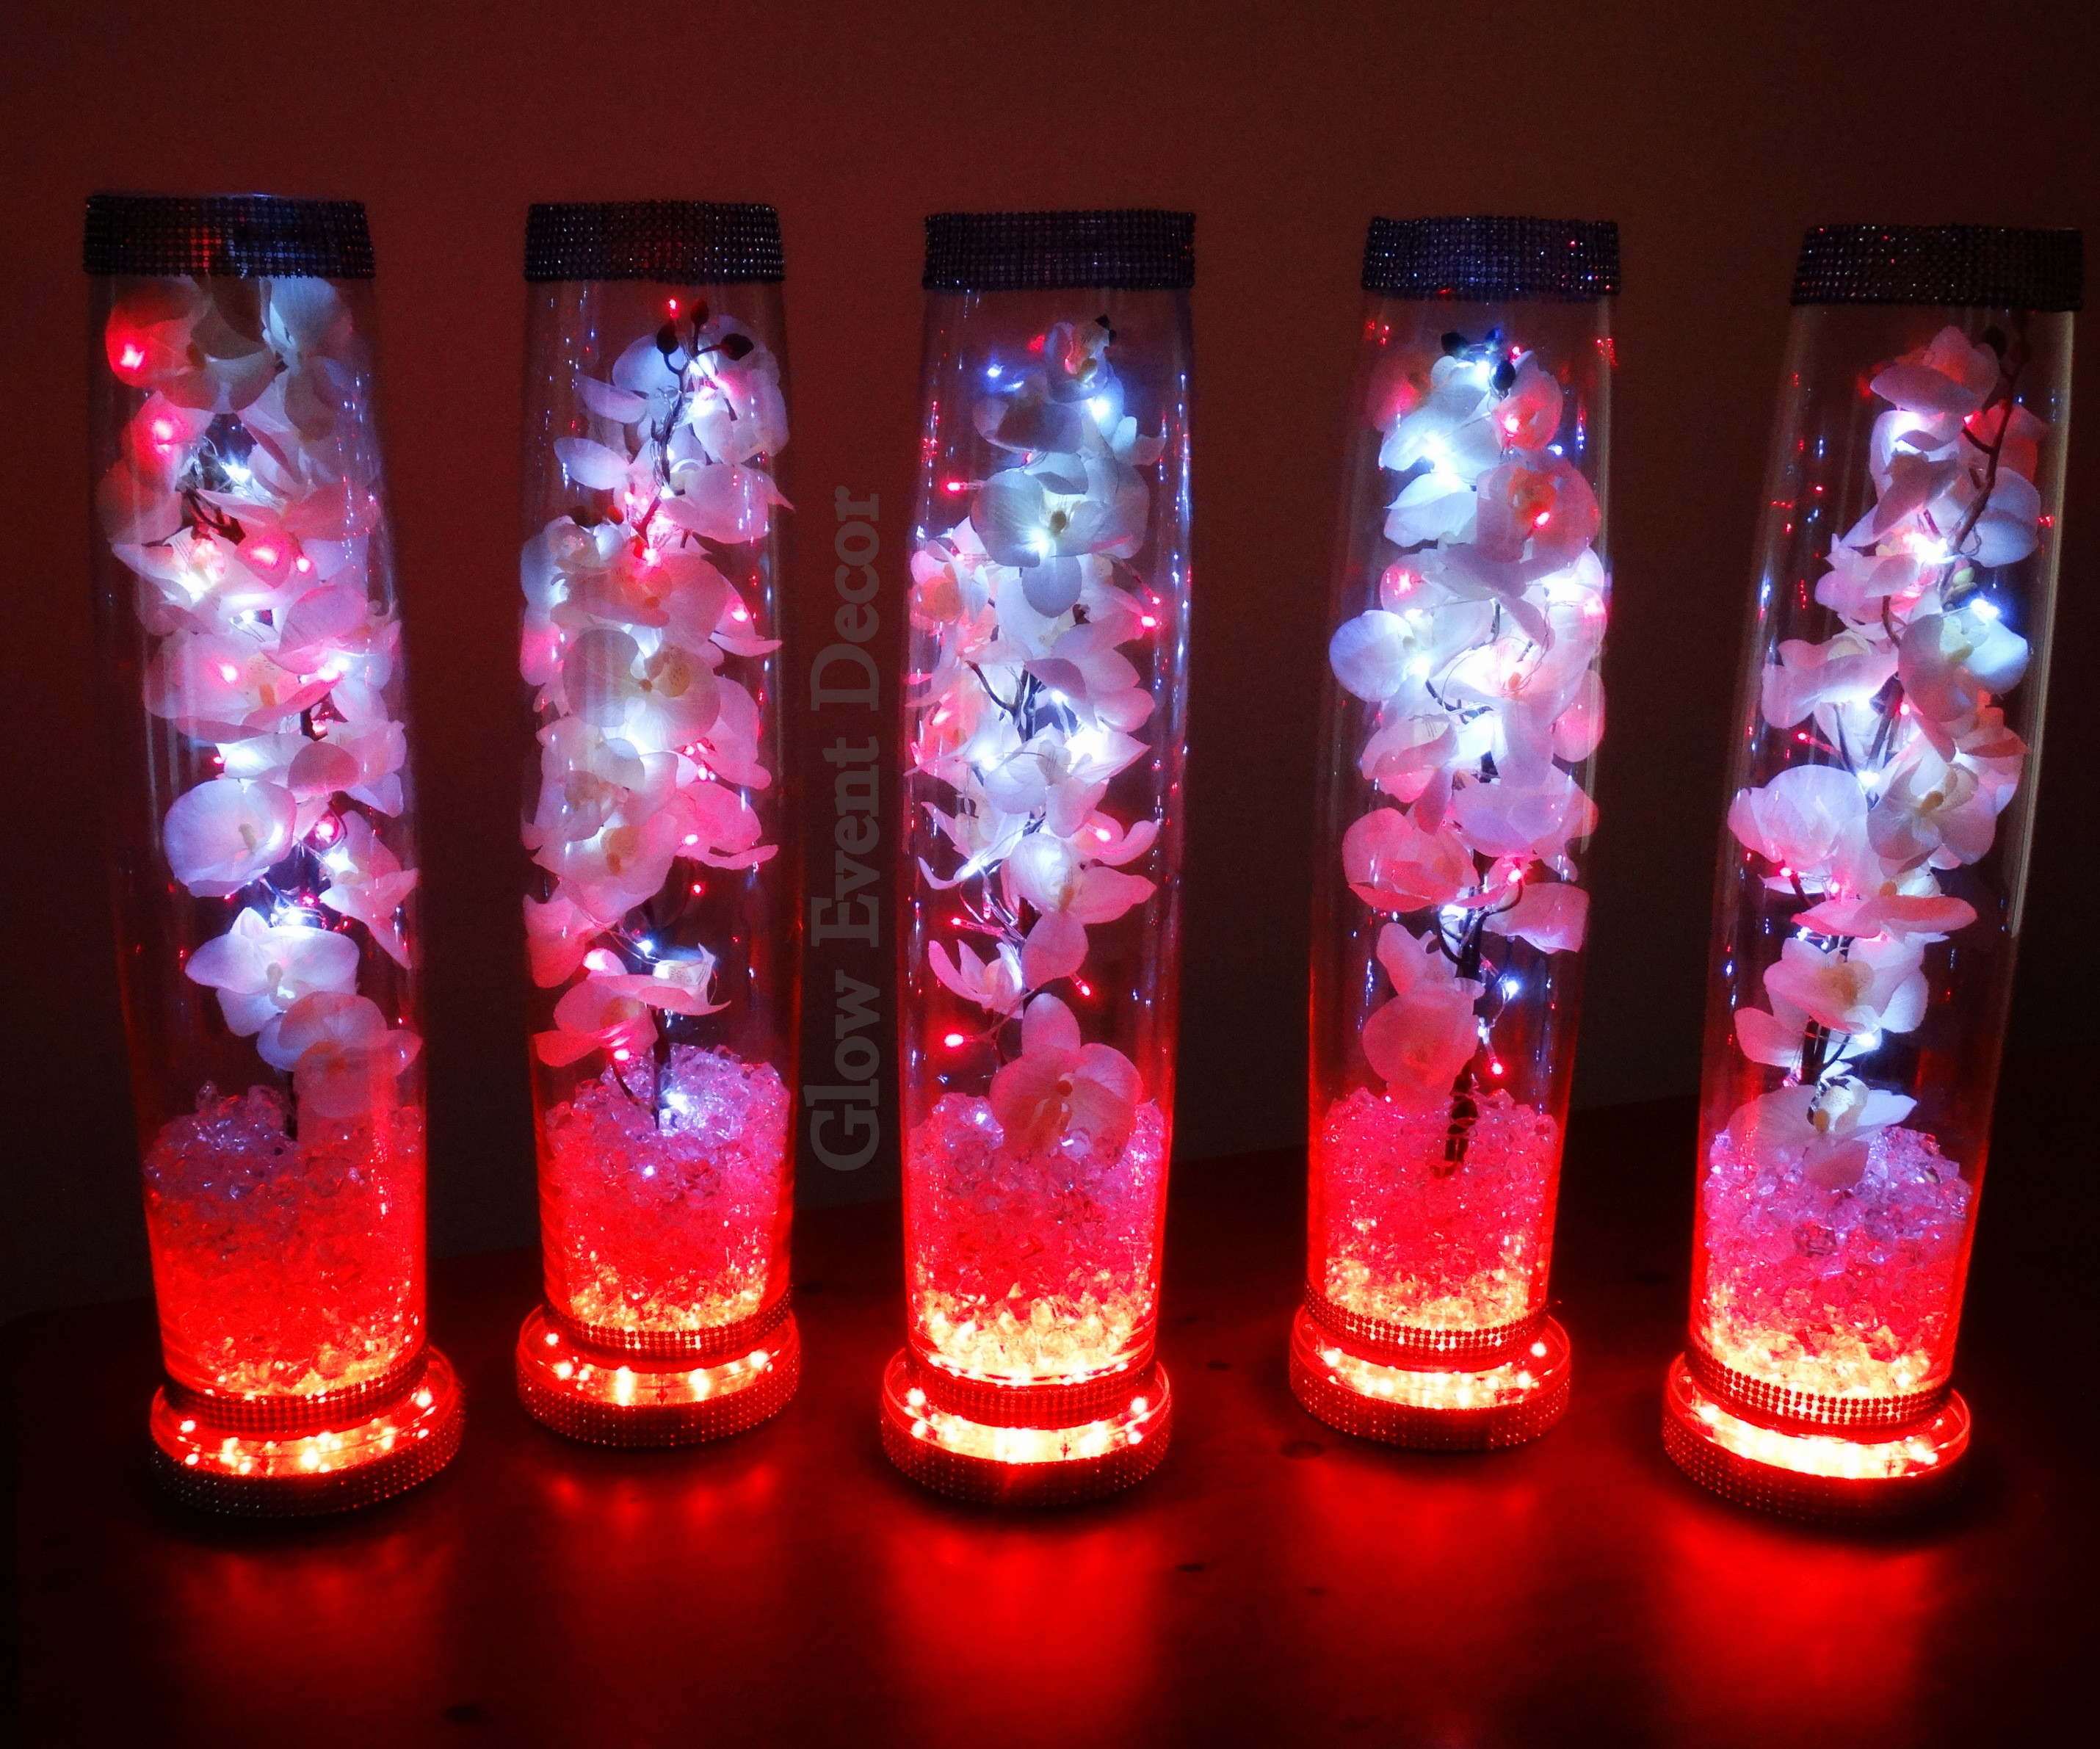 10 Fantastic Light Up Vases Weddings 2024 free download light up vases weddings of led orchid cylinder vase glow event decor throughout cylinder vase trio submerged lillies gyp sophlia bablies breath crystal garland for bridal